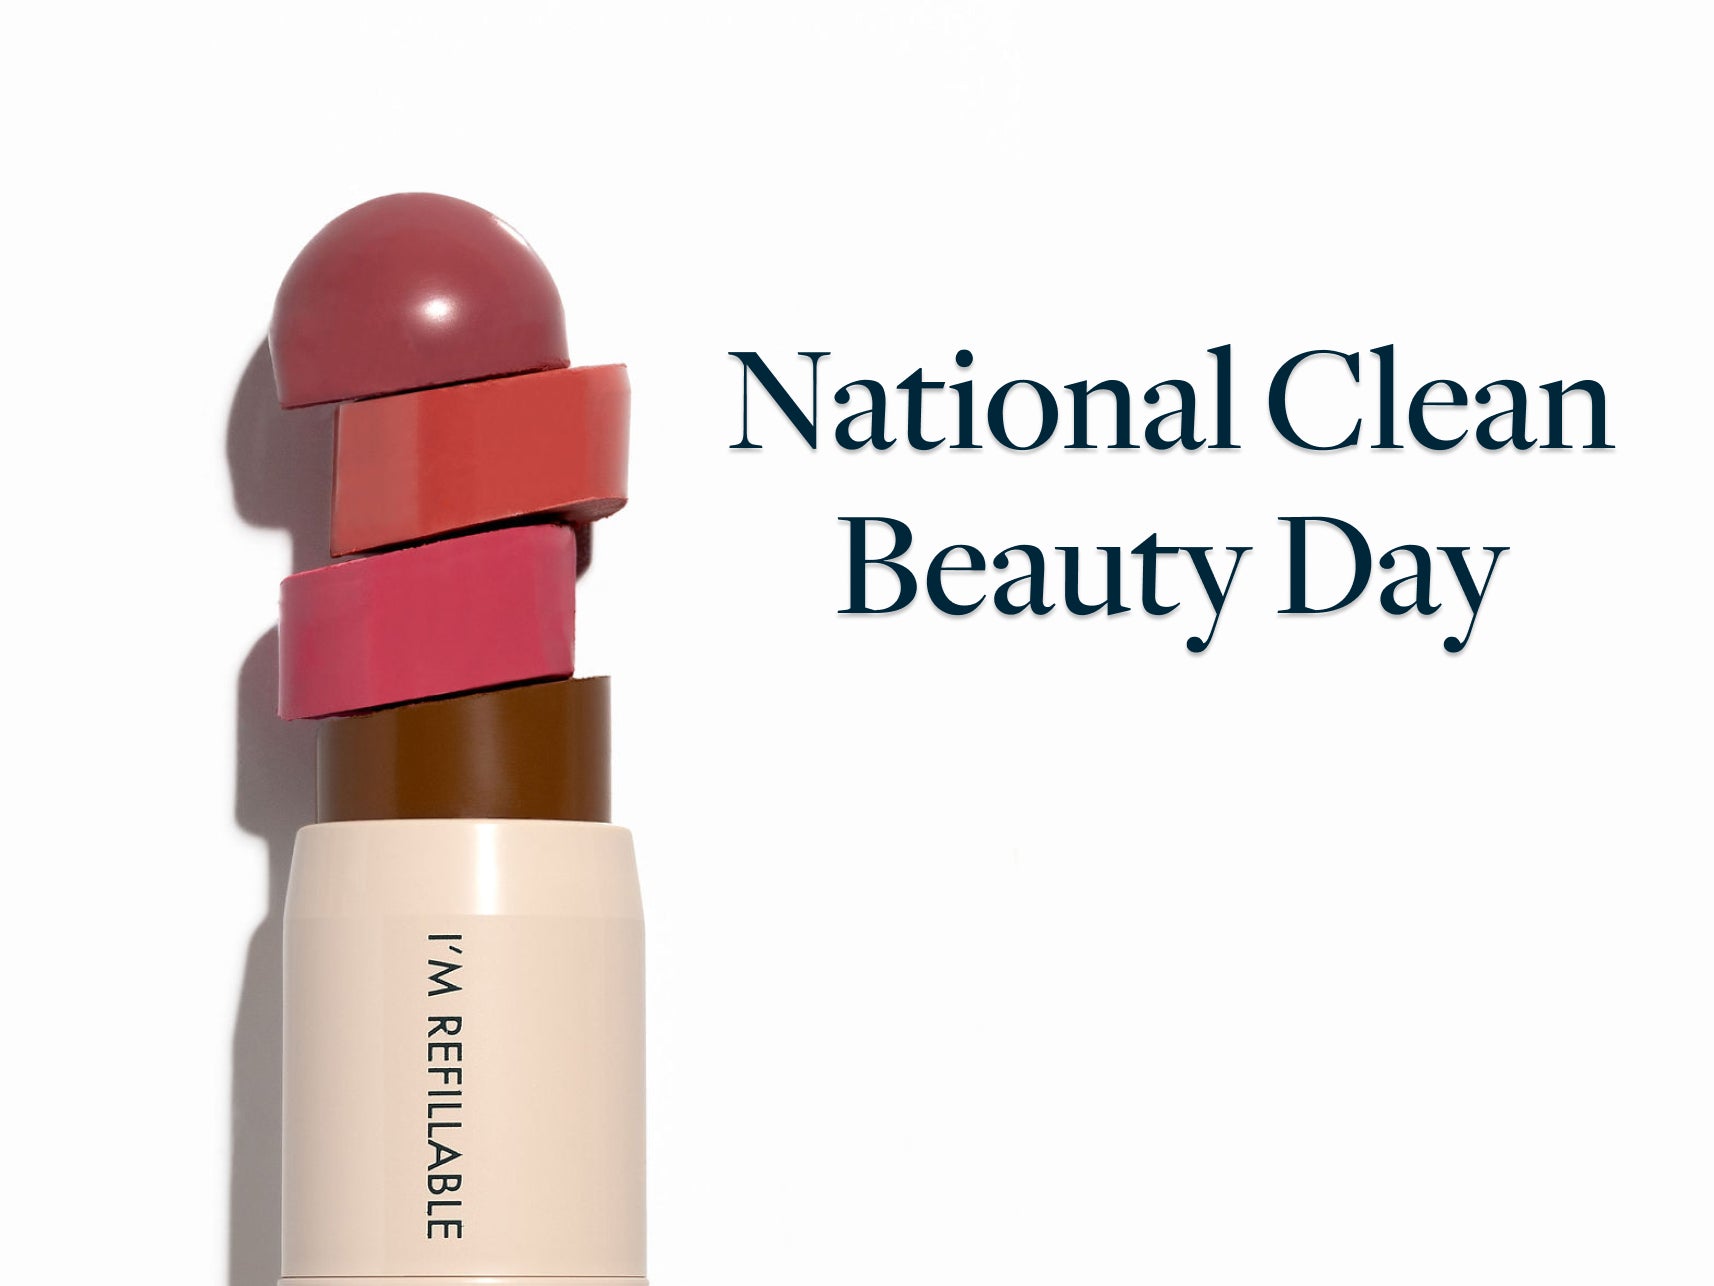 National Clean Beauty Day